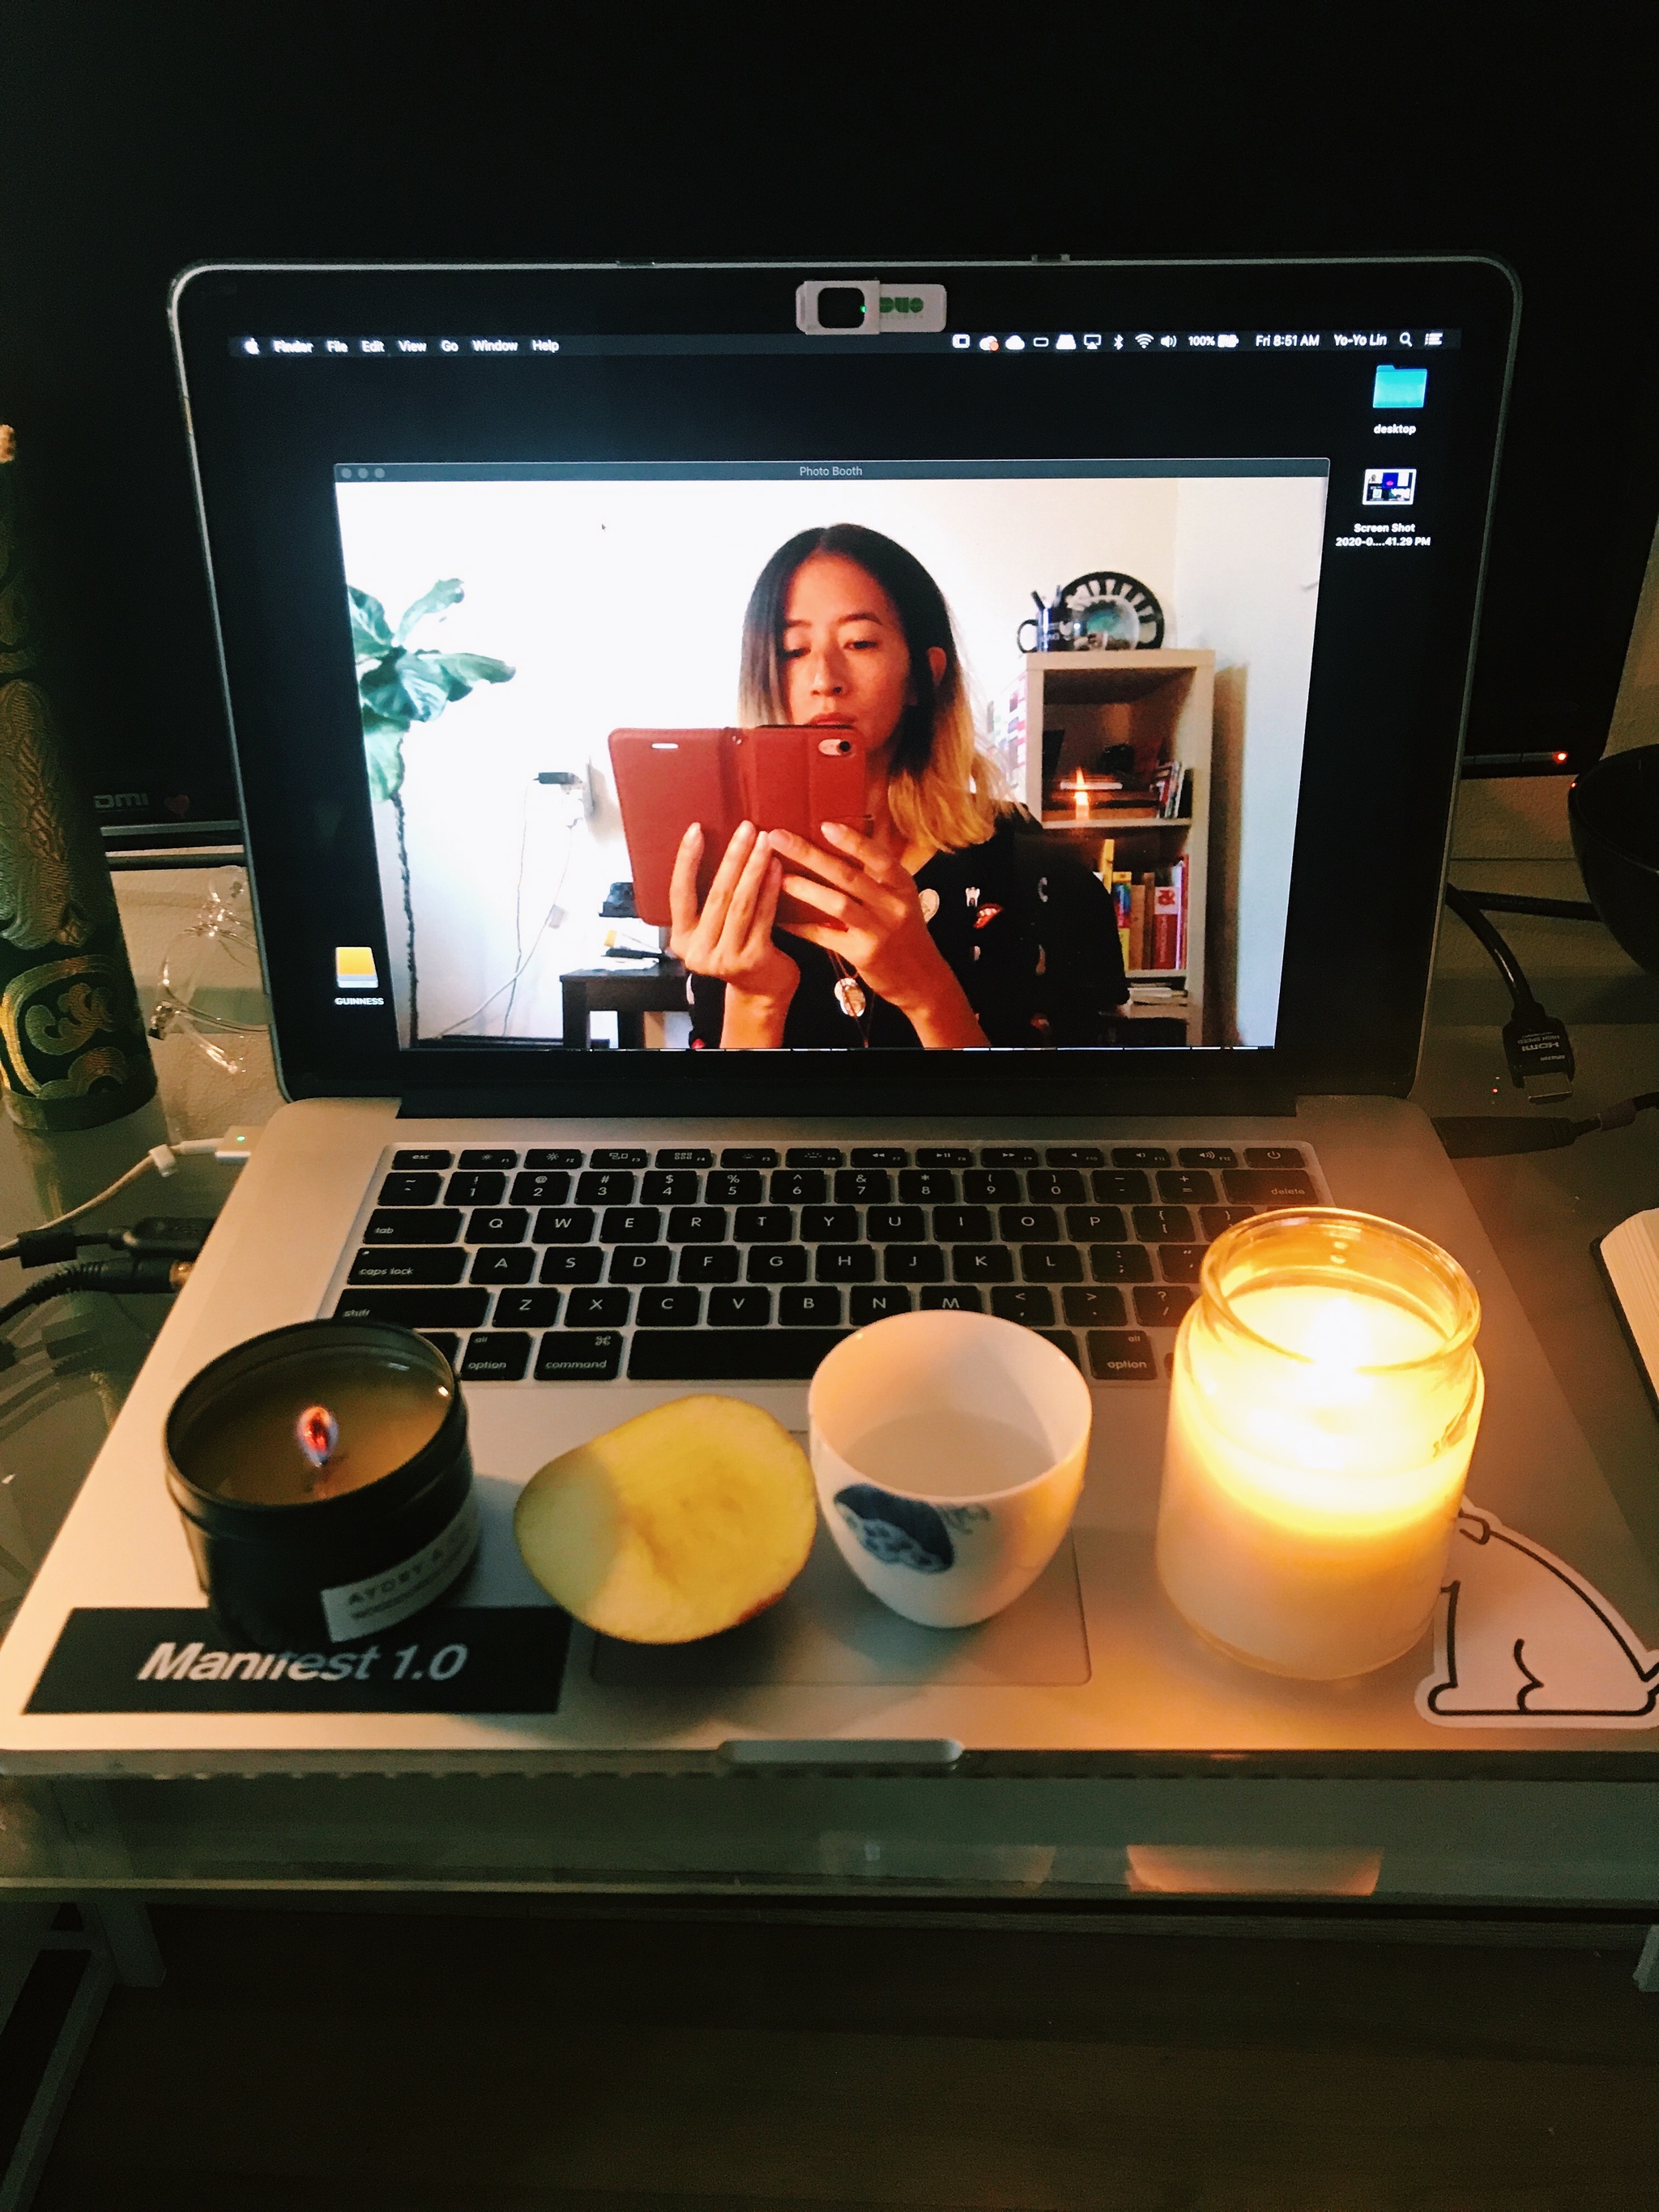 An open laptop with a webcam feed of Yo-Yo Lin in her bedroom holding her phone up to her face, obscuring her mouth. Yo-Yo is East Asian and has dark straight hair with blonde tips. On her laptop is a small altar consisting of two candles, a piece of apple and a white Chinese tea cup.